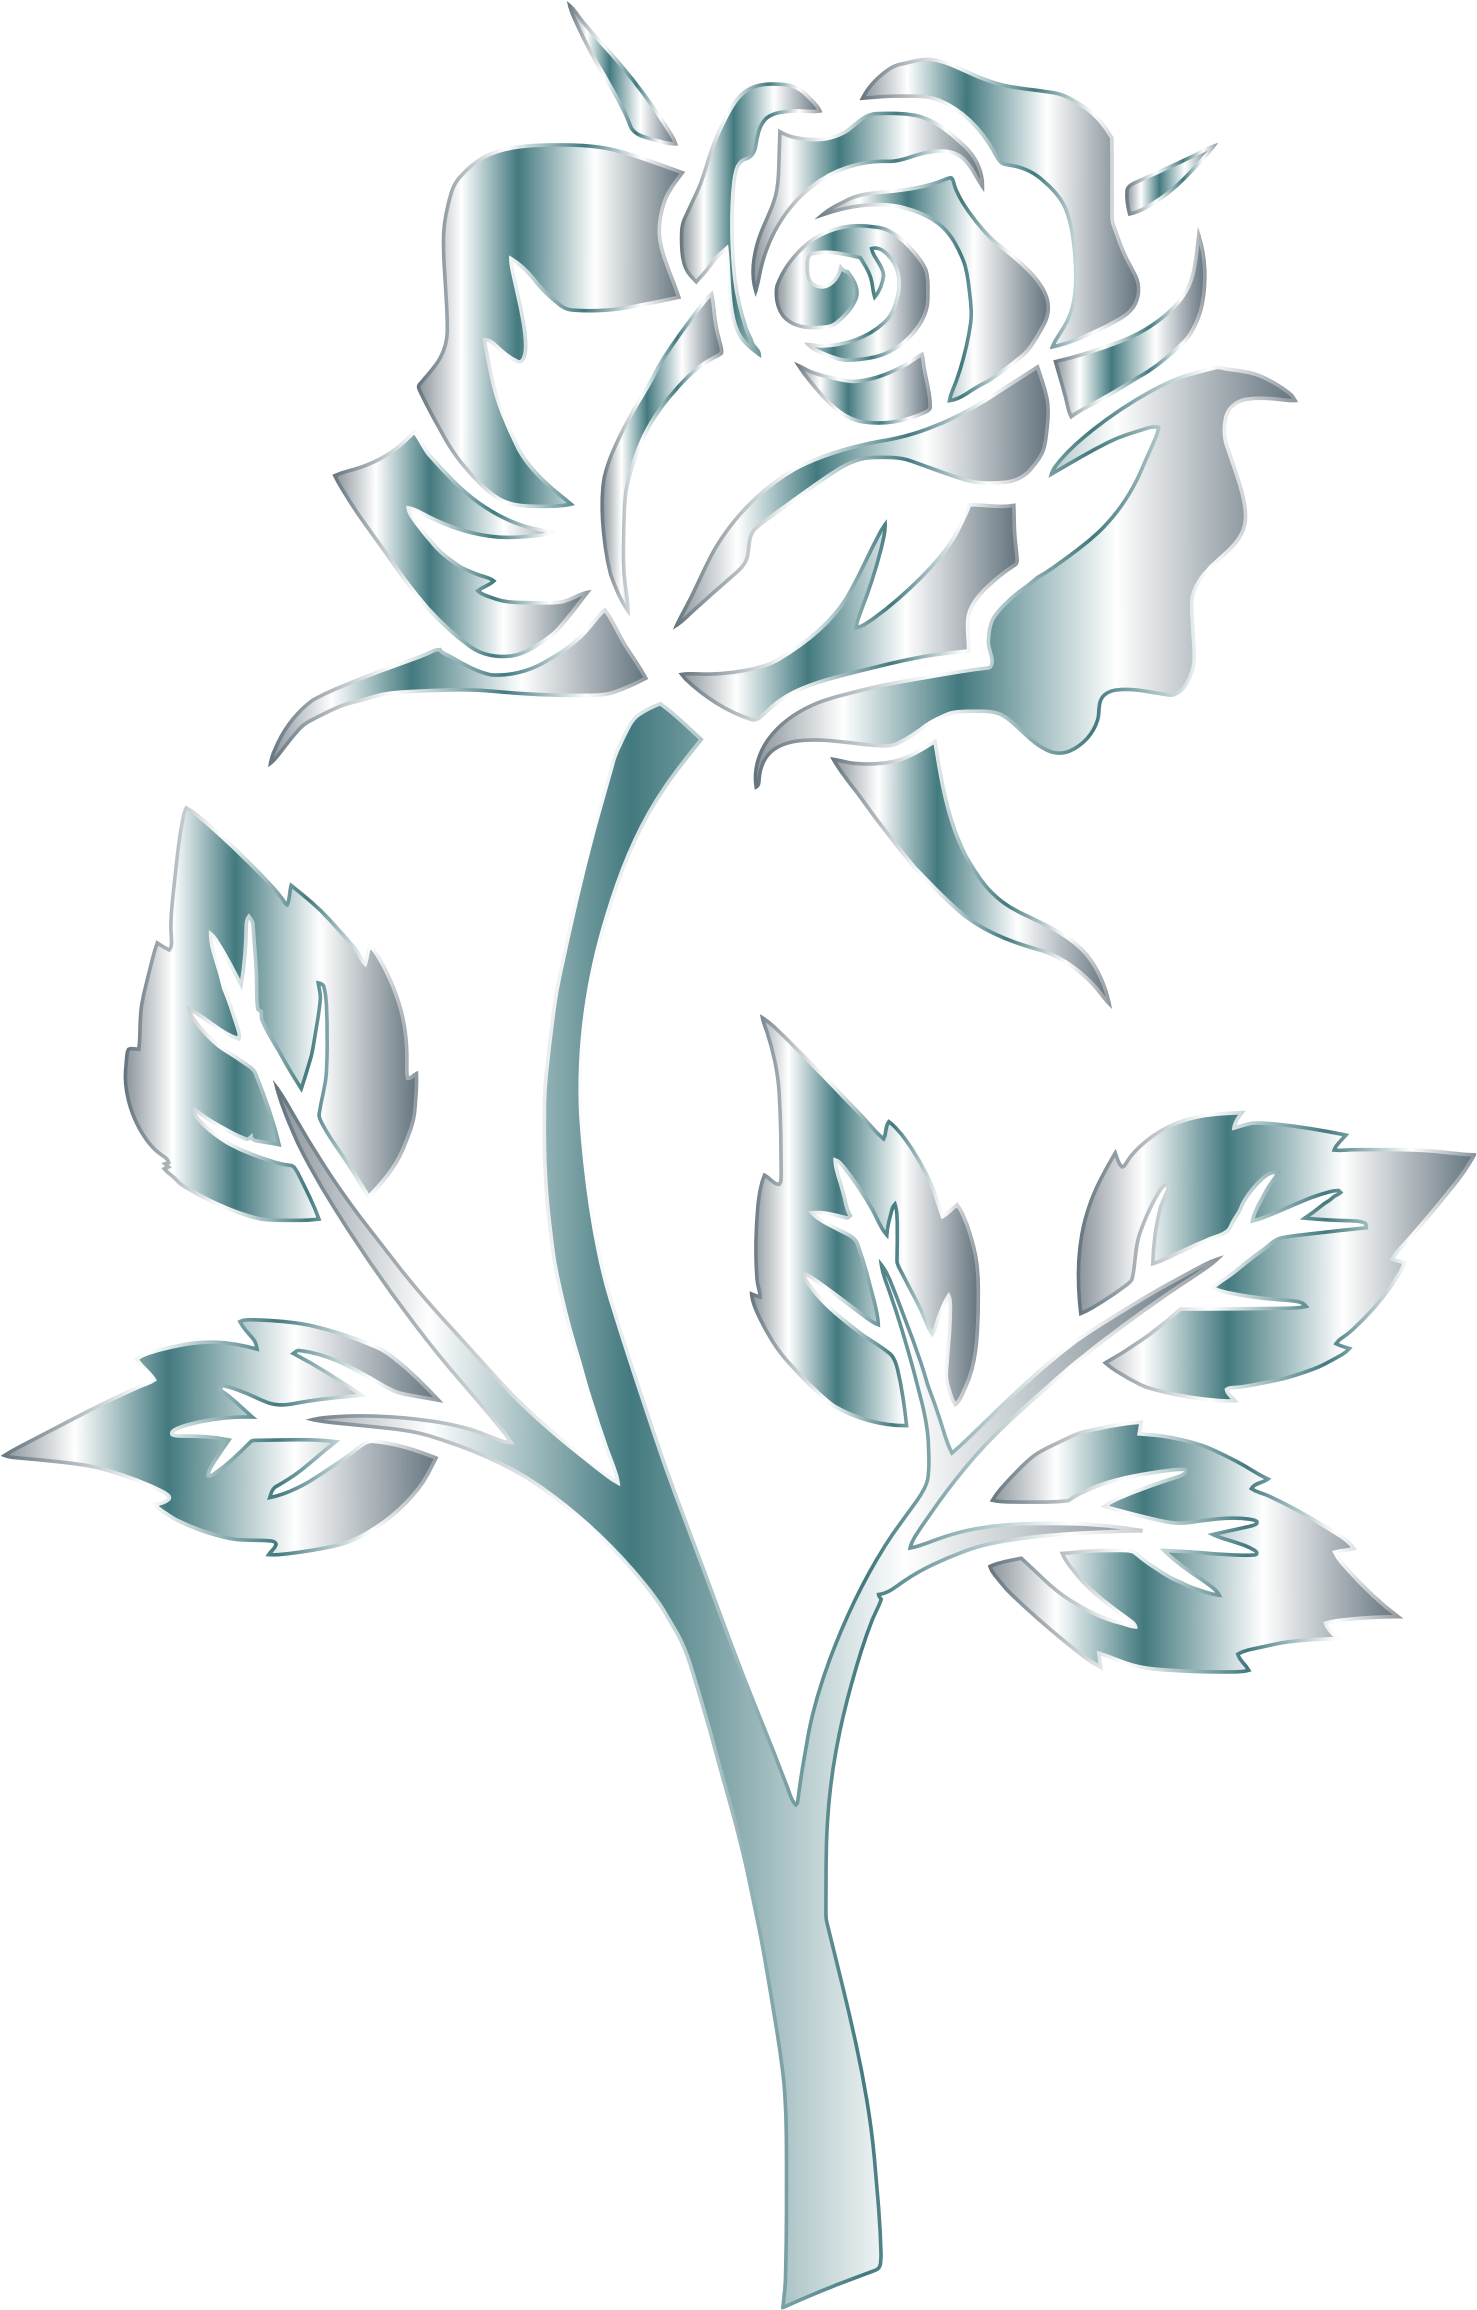 Silver roses clipart - Clipground